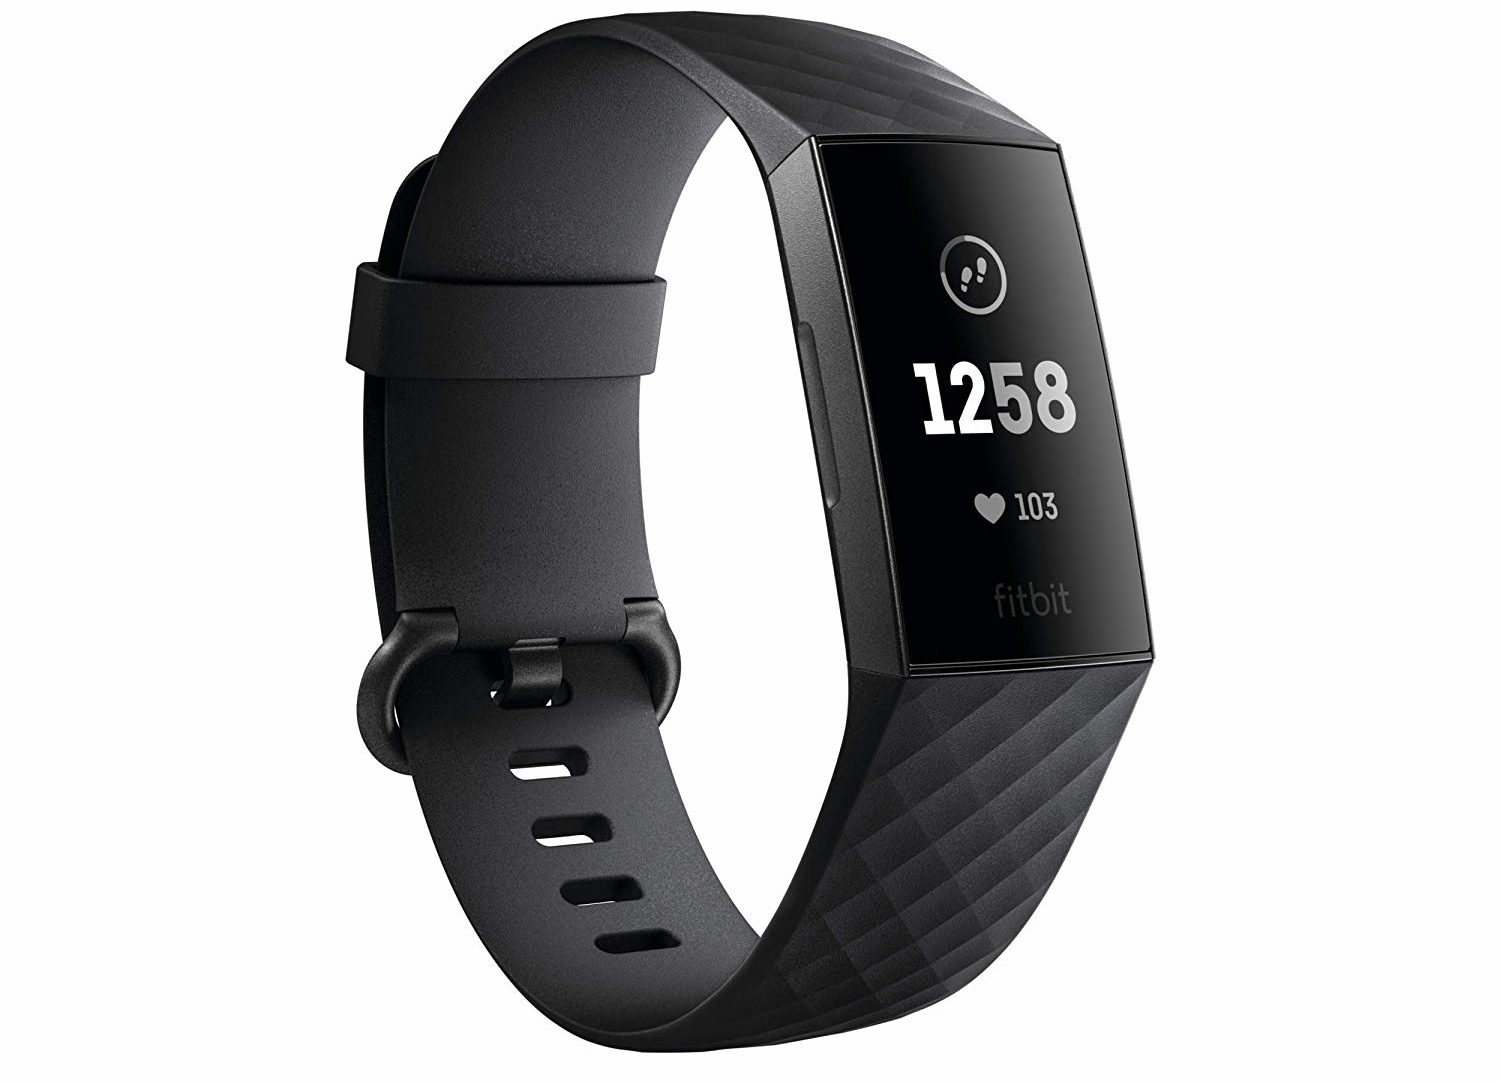 Best Gifts For Him 2022: FitBit Charge 3 2022